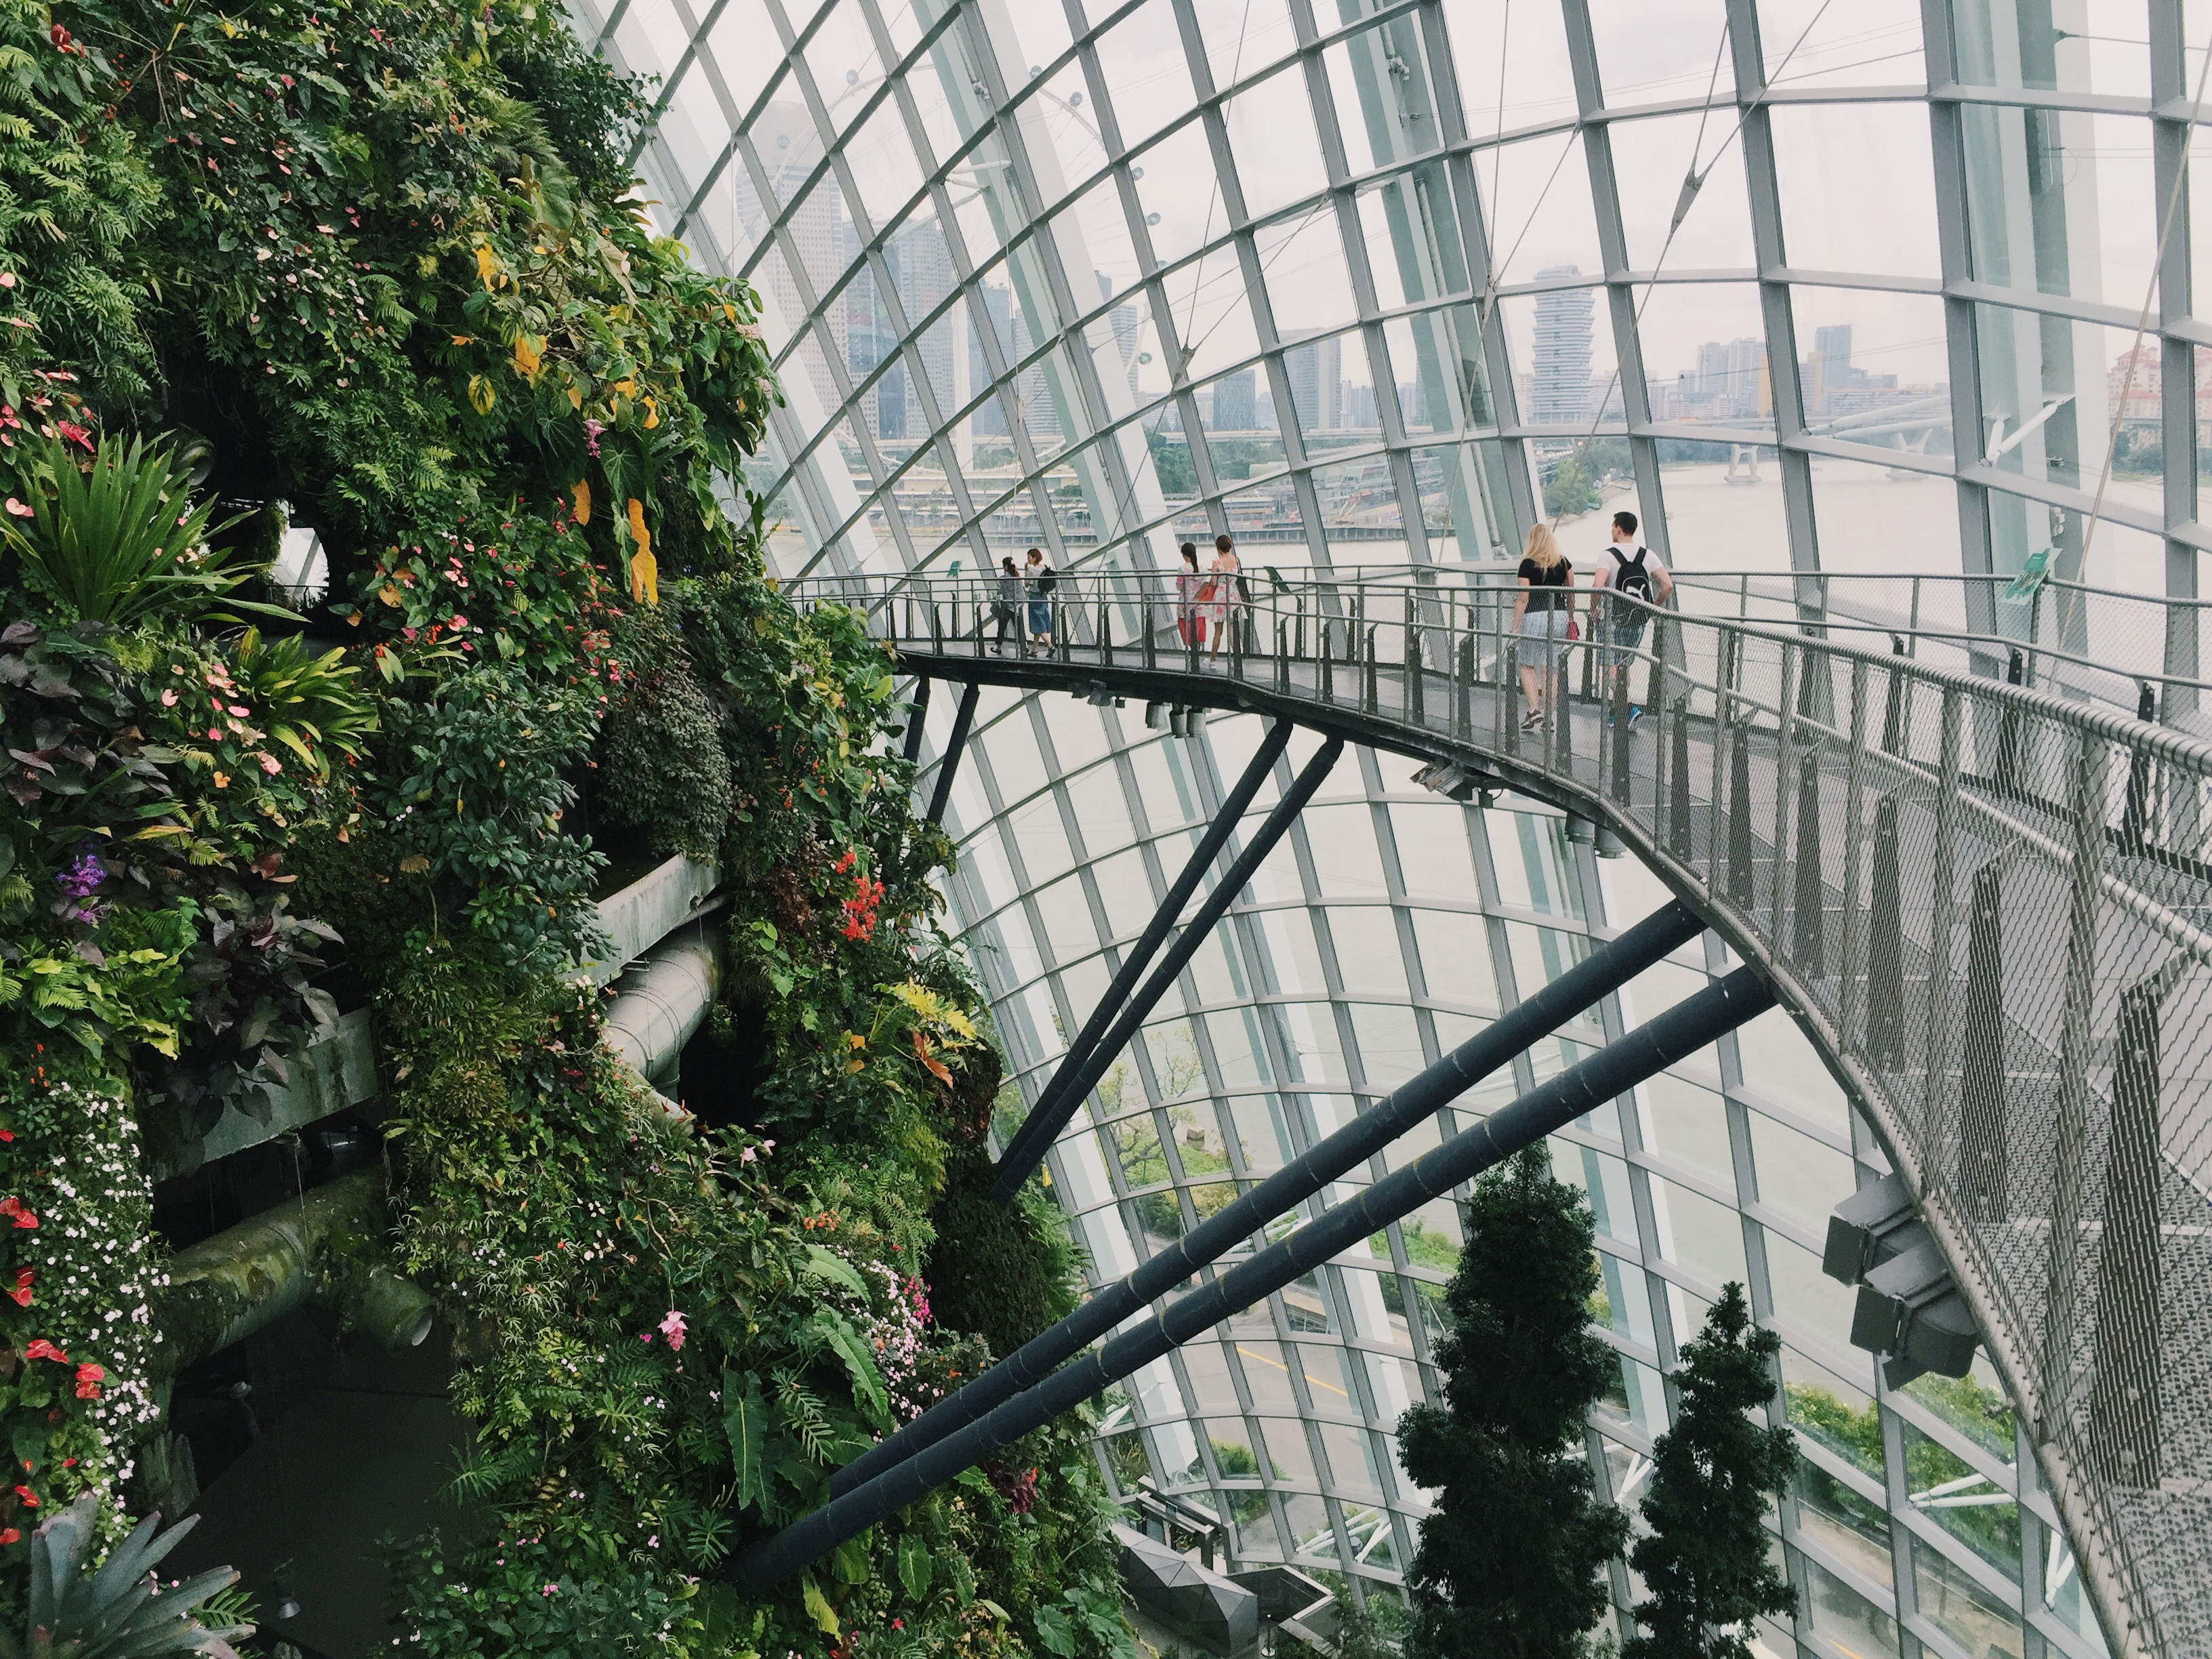 The inside of the cloud forest with seemingly floating pathways encircling the man made mountain